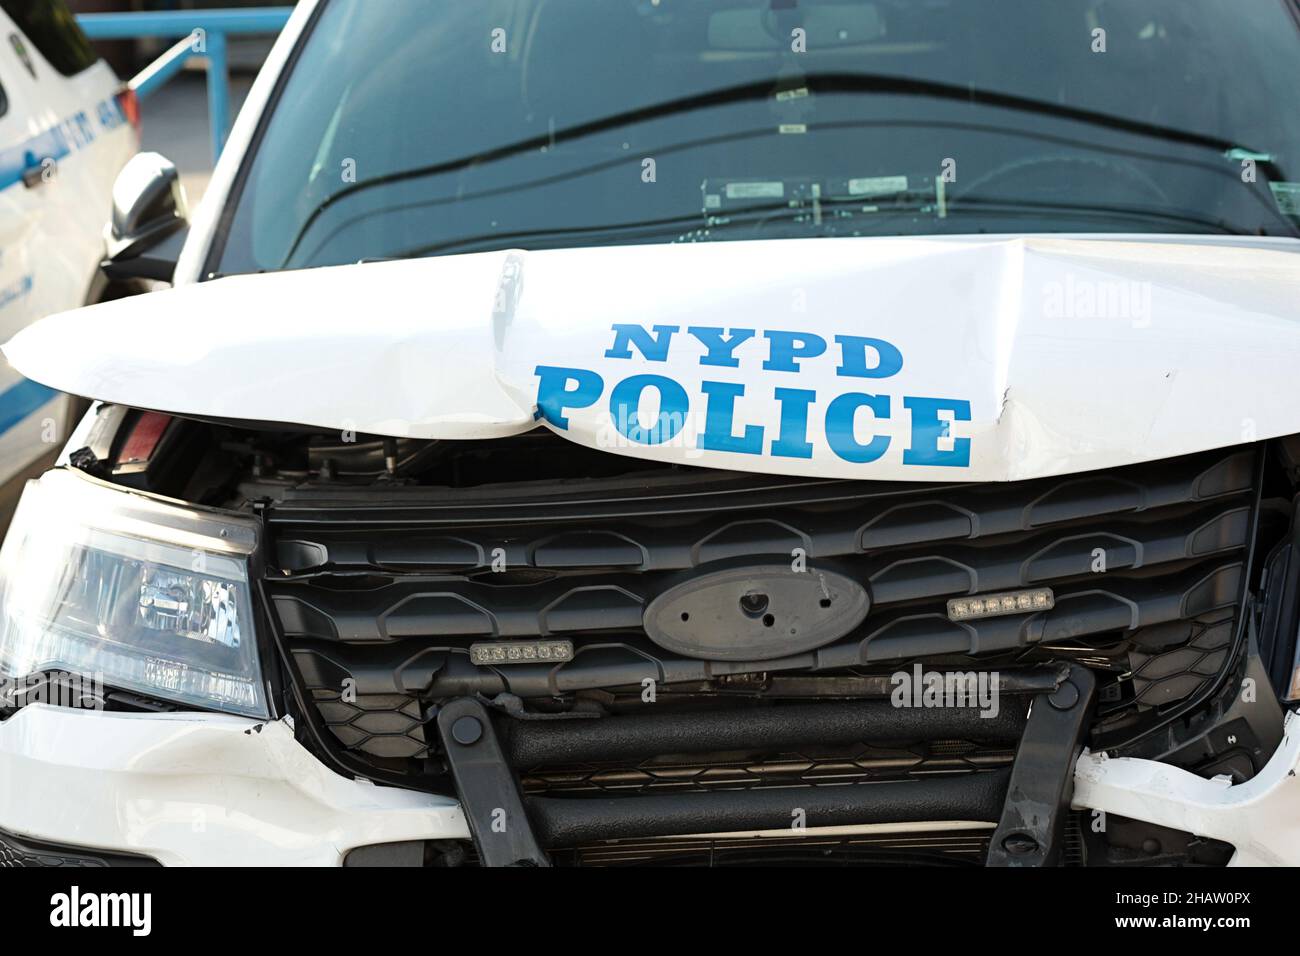 New York, NY - October 2, 2021: Crashed NYPD patrol car with police logo on dented hood and smashed grill. Stock Photo